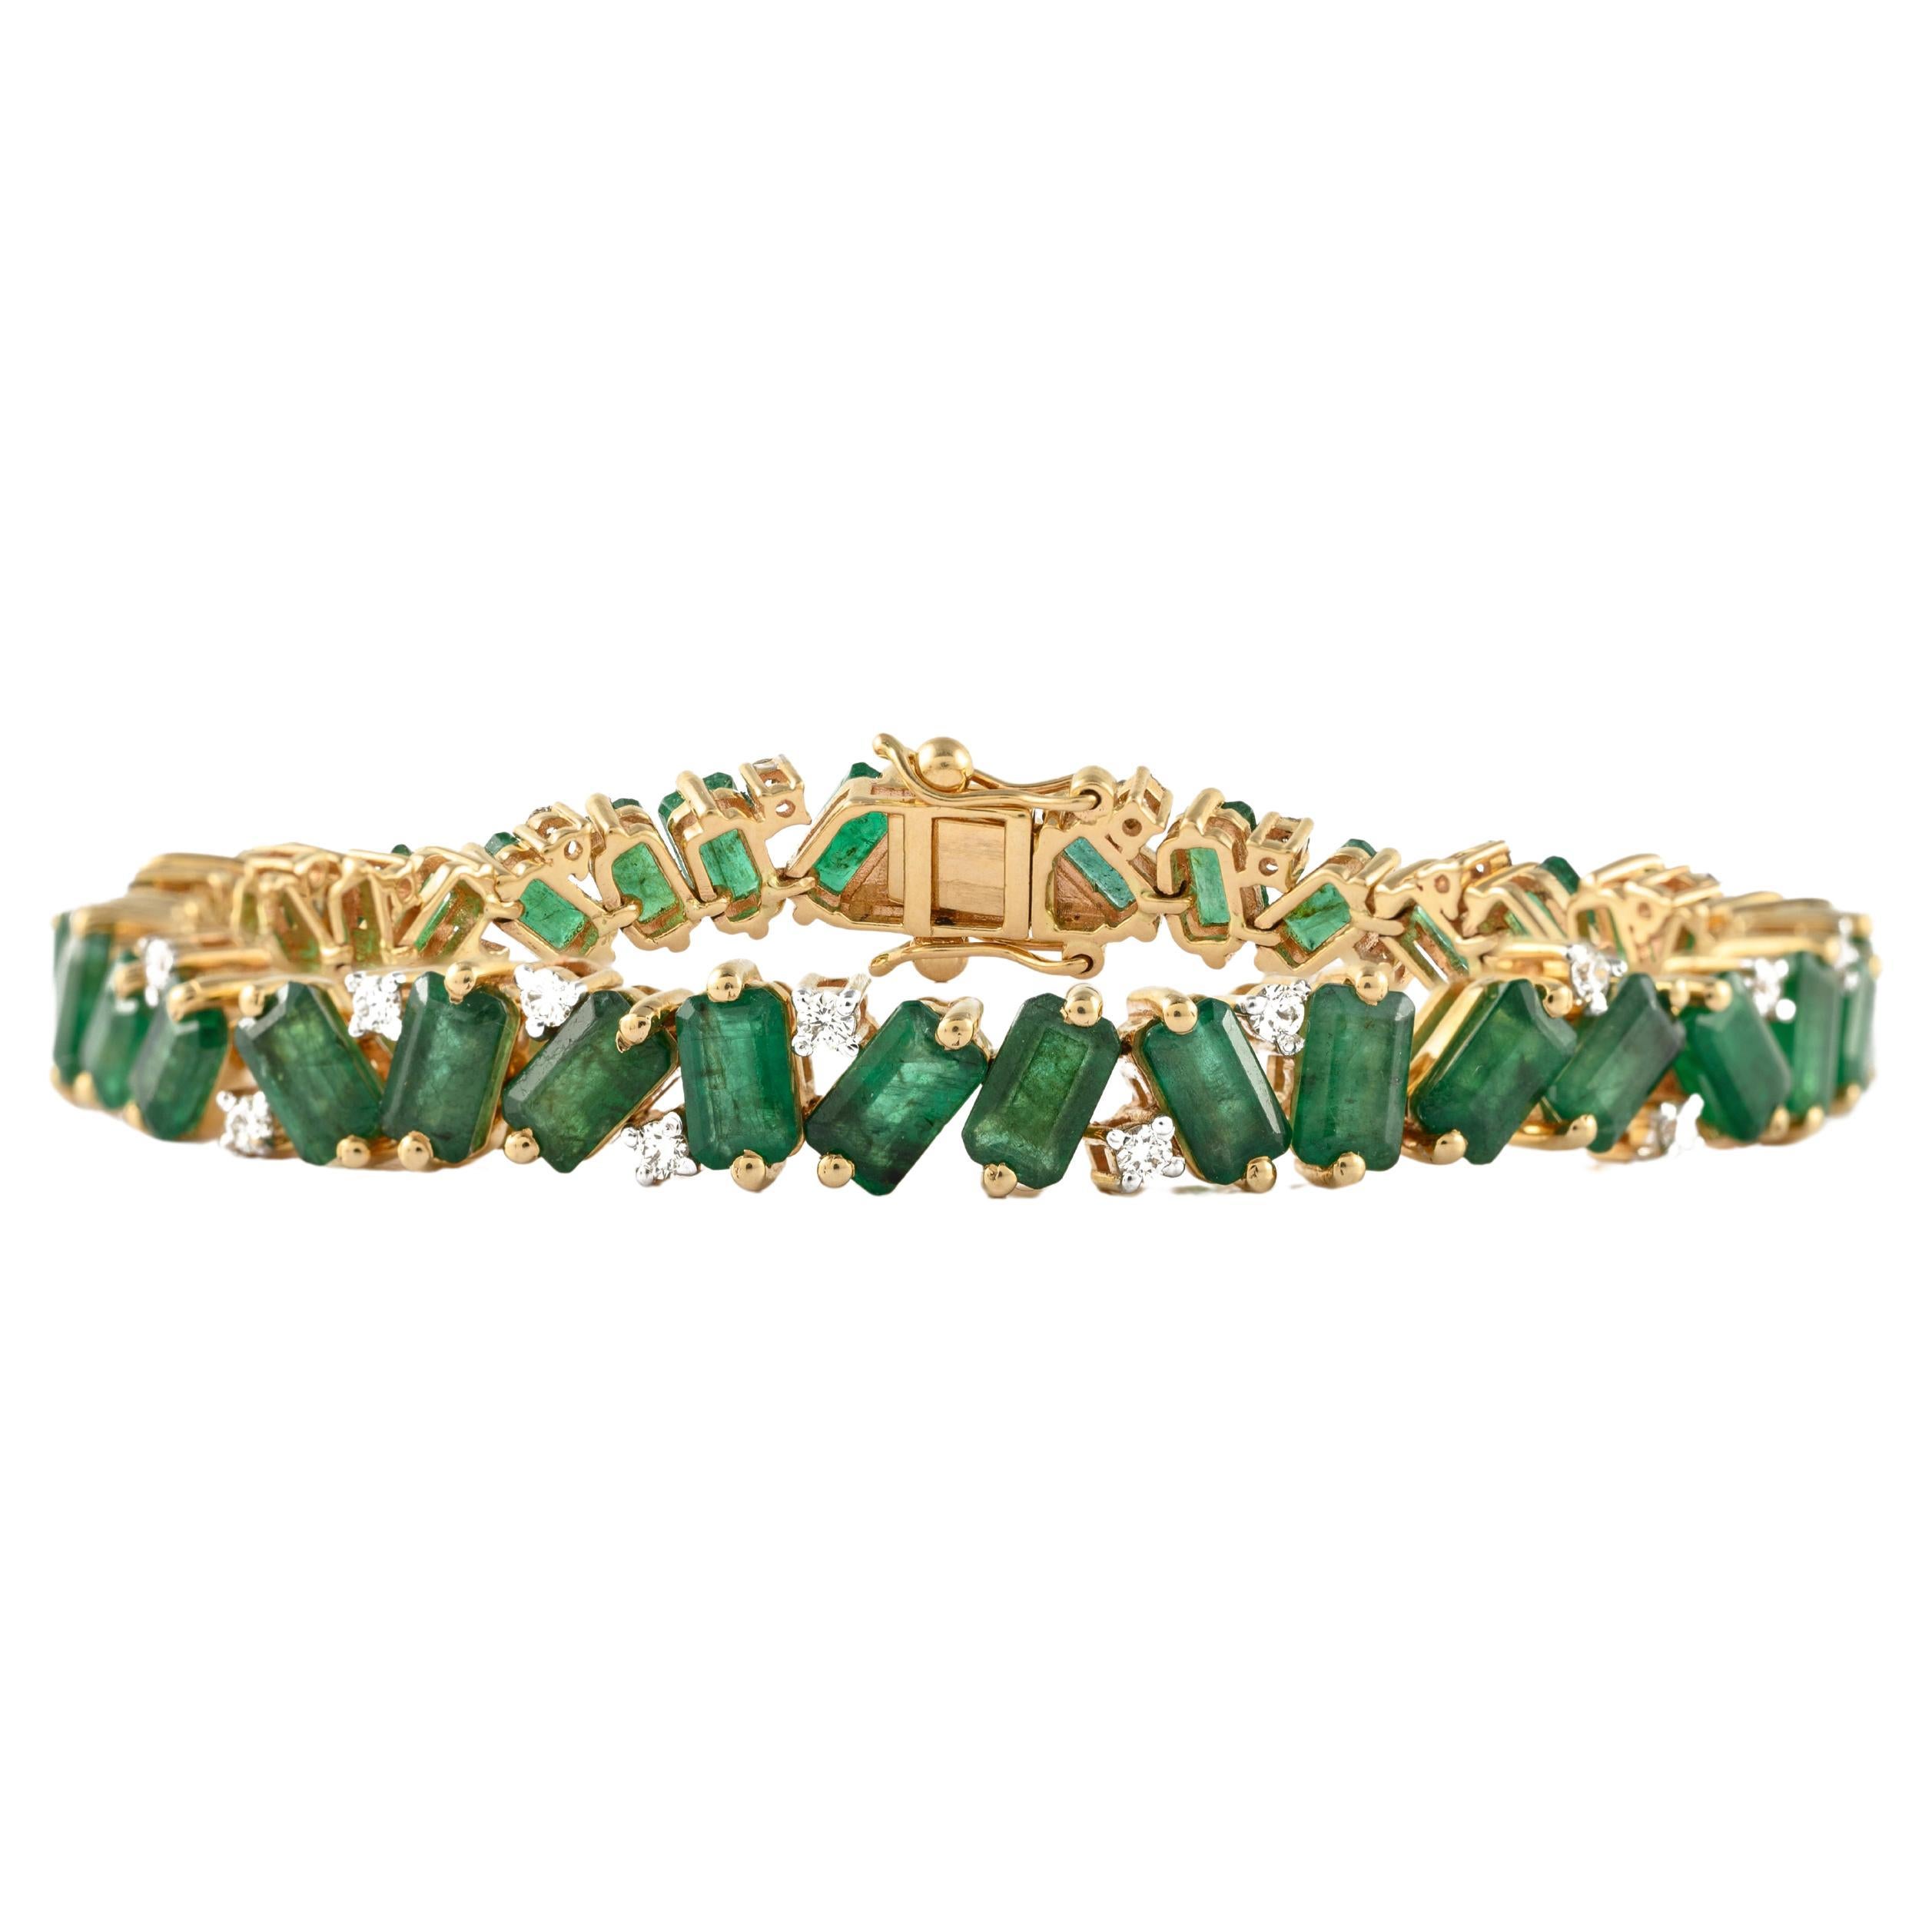 10.68 ct Brilliant Diamond and Emerald Tennis Bracelet in 14K Solid Yellow Gold